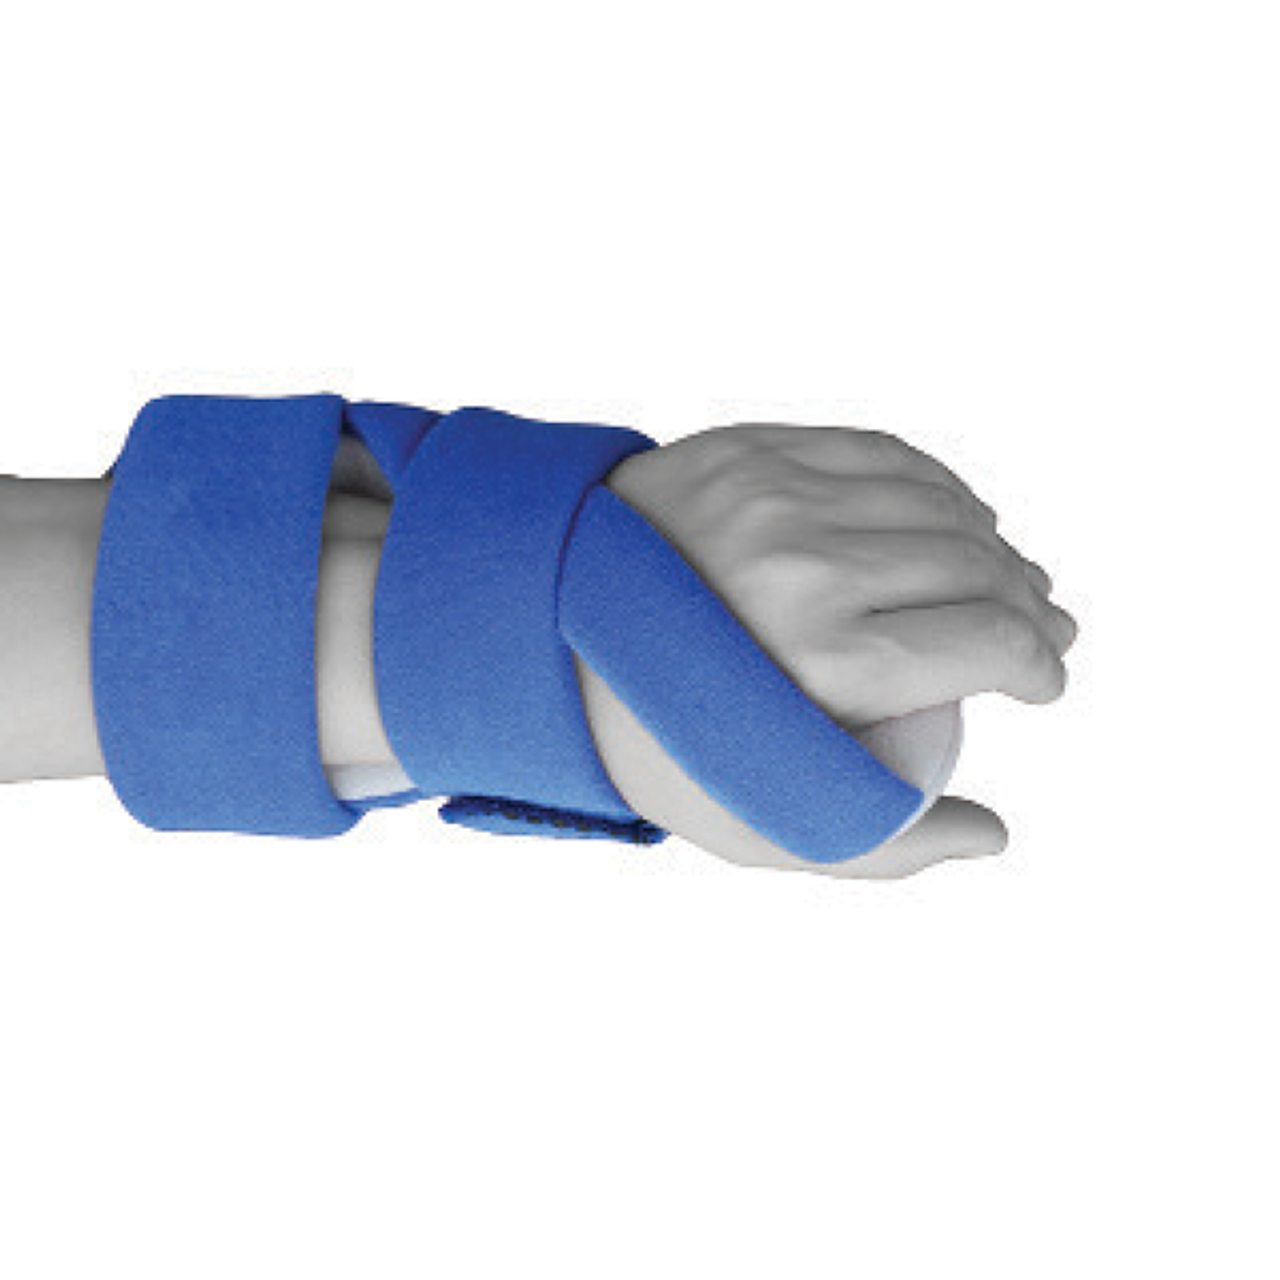 RMI COCK-UP HAND SPLINT - MED RIGHT REPLACEMENT LINER, 20739-AK-MR